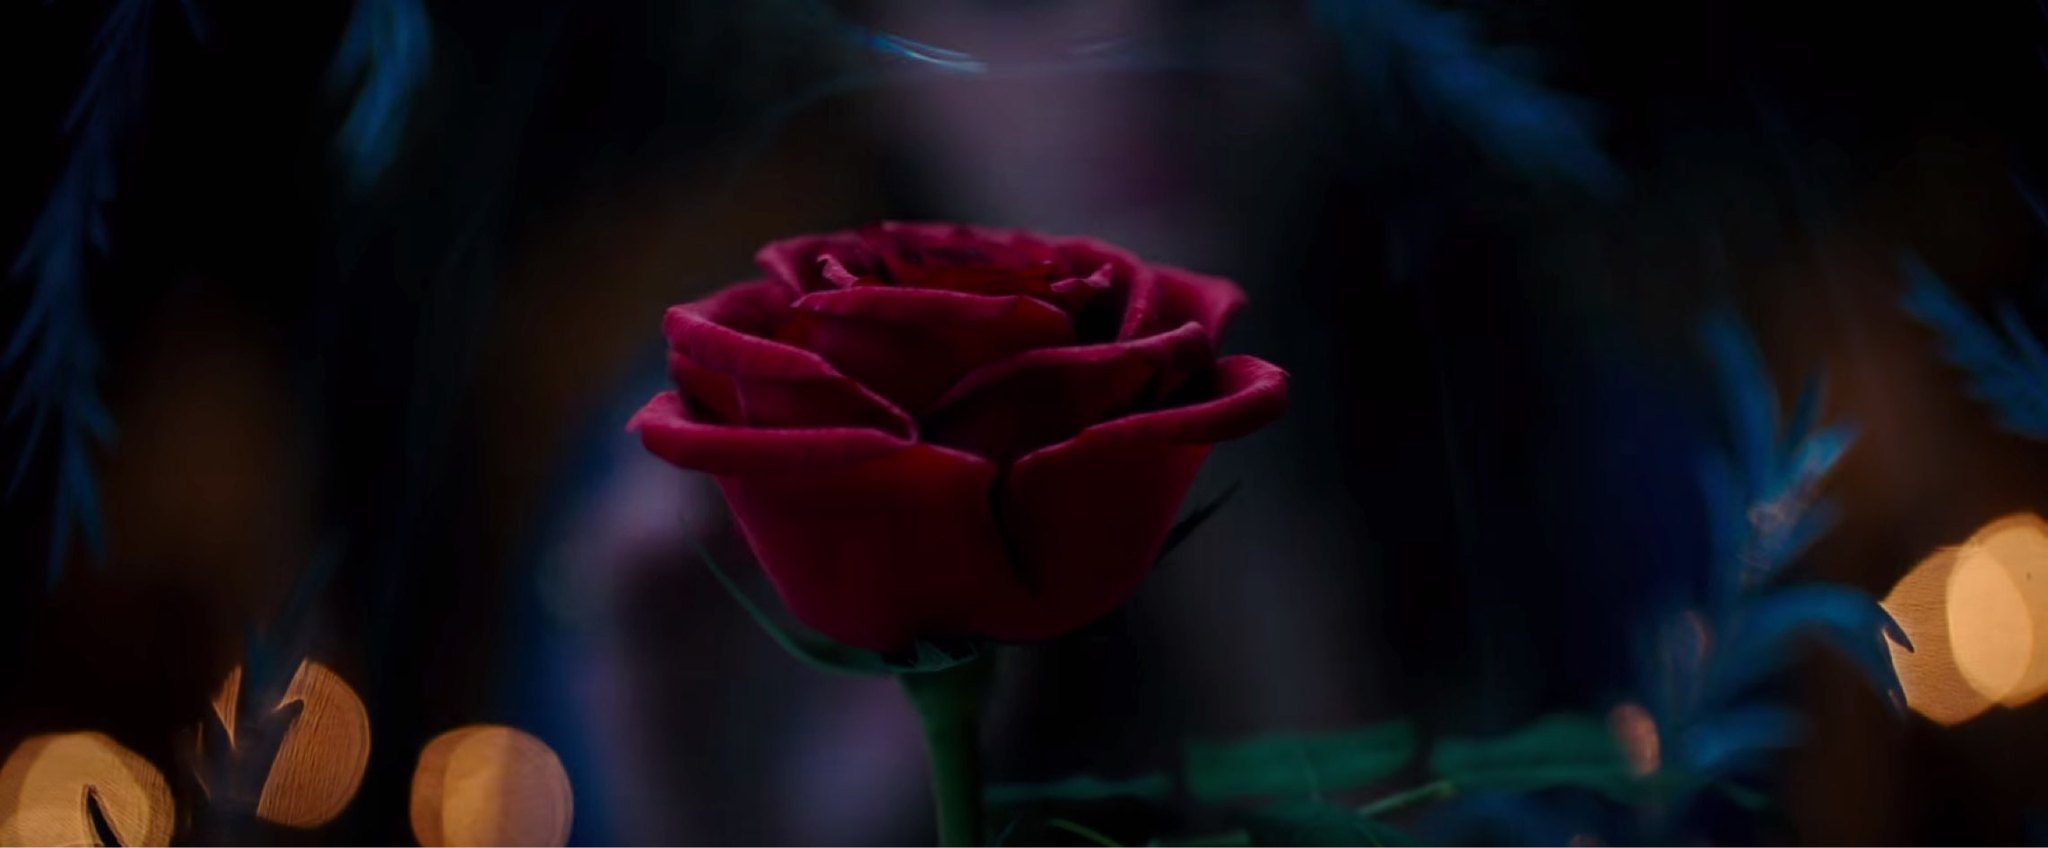 Brand NEW Live-Action ‘Beauty and the Beast’ Teaser Trailer Released